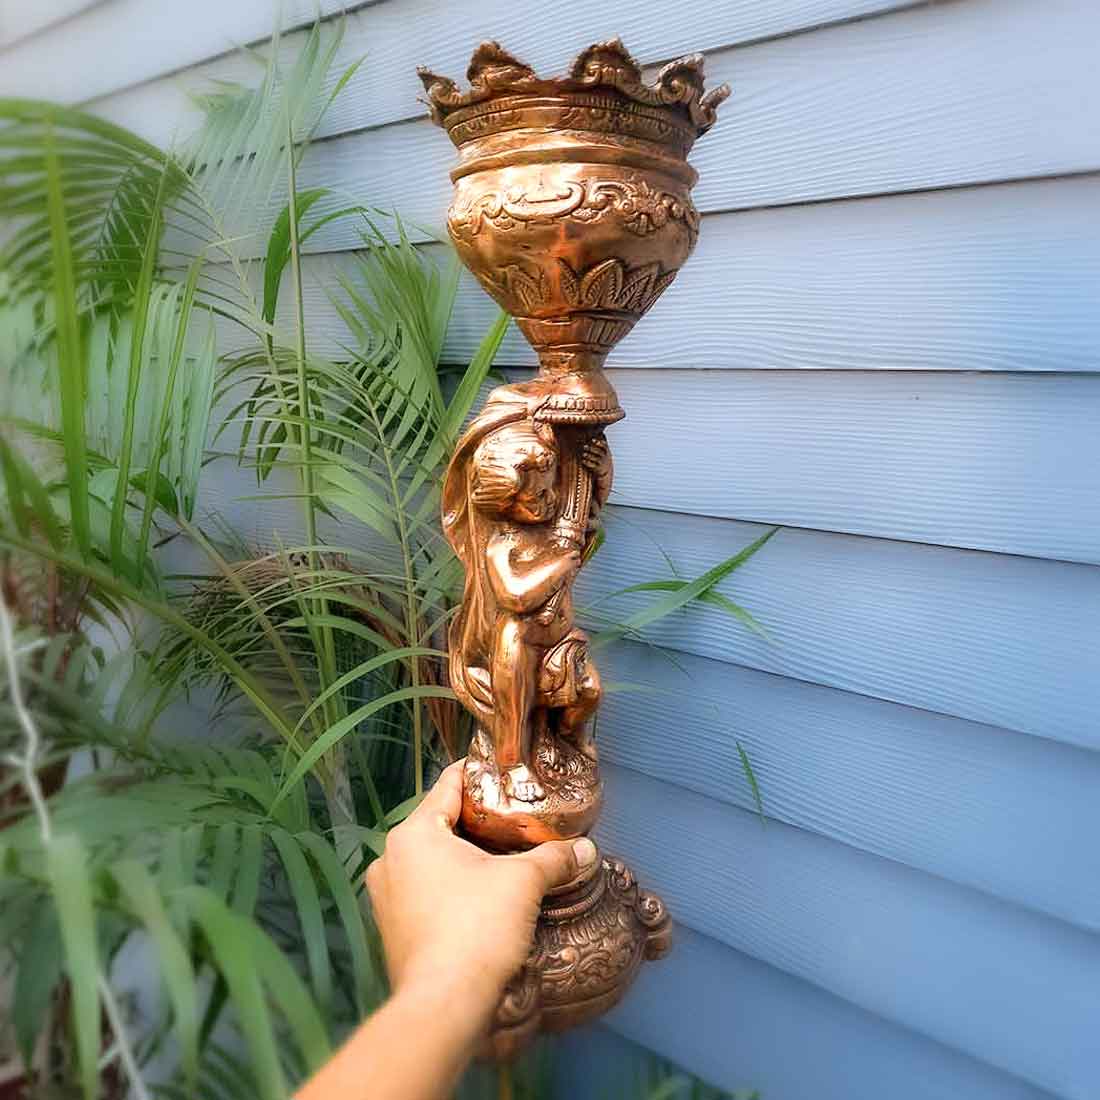 Vase | Flower Pot - Metal | Showpiece Cum Vase - Figurine Holding Mashal - for Home Decoration, Living Room, Table, Shelf, Office , Interior Decor | Gifts for All Occasions -18 Inch